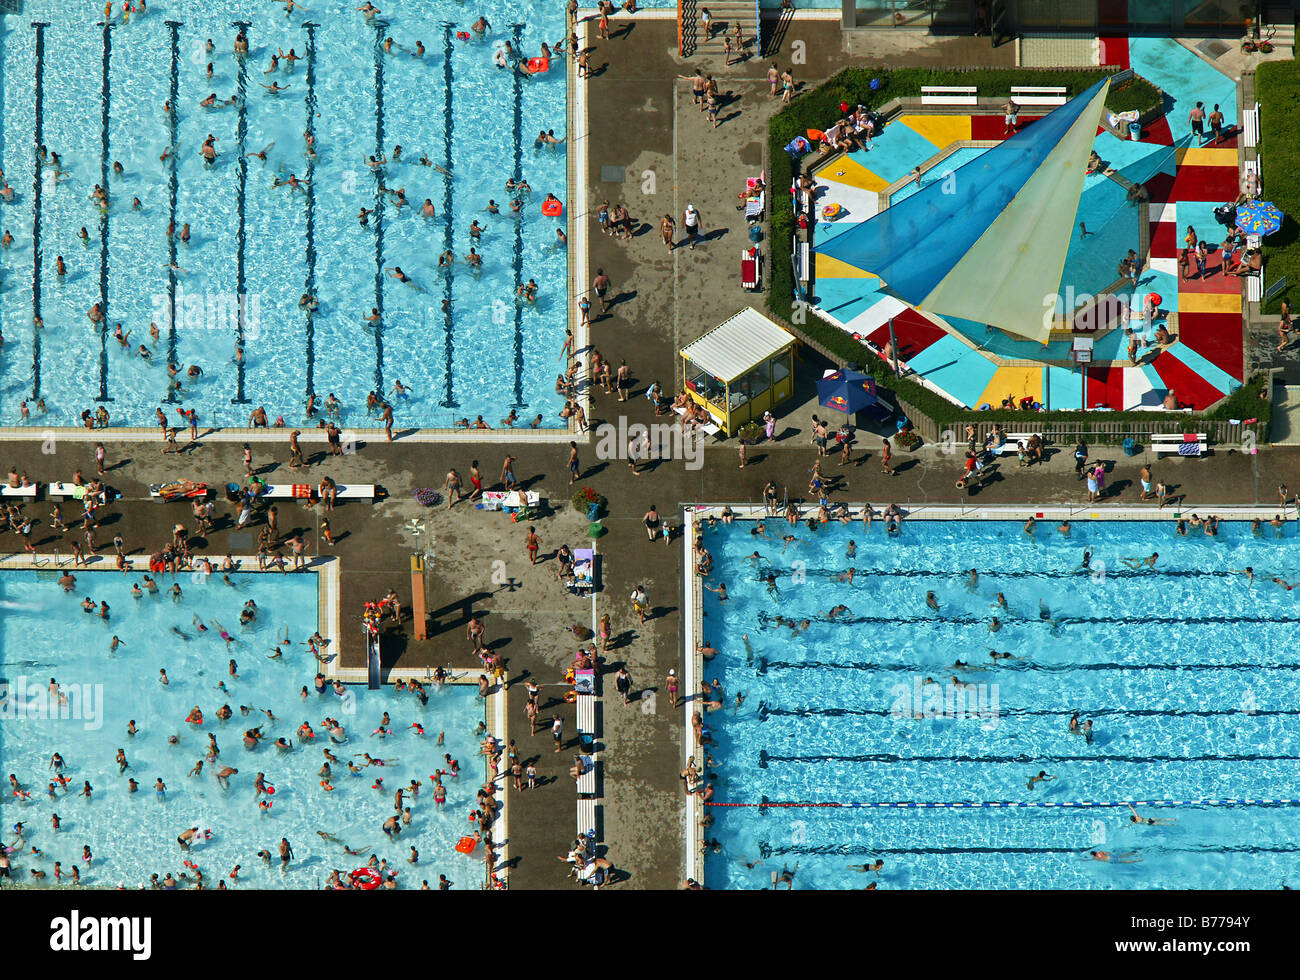 Aerial view, Freibad Berge, open air pool, during record attendance, Hamm, Ruhr Area, North Rhine-Westphalia, Germany, Europe Stock Photo